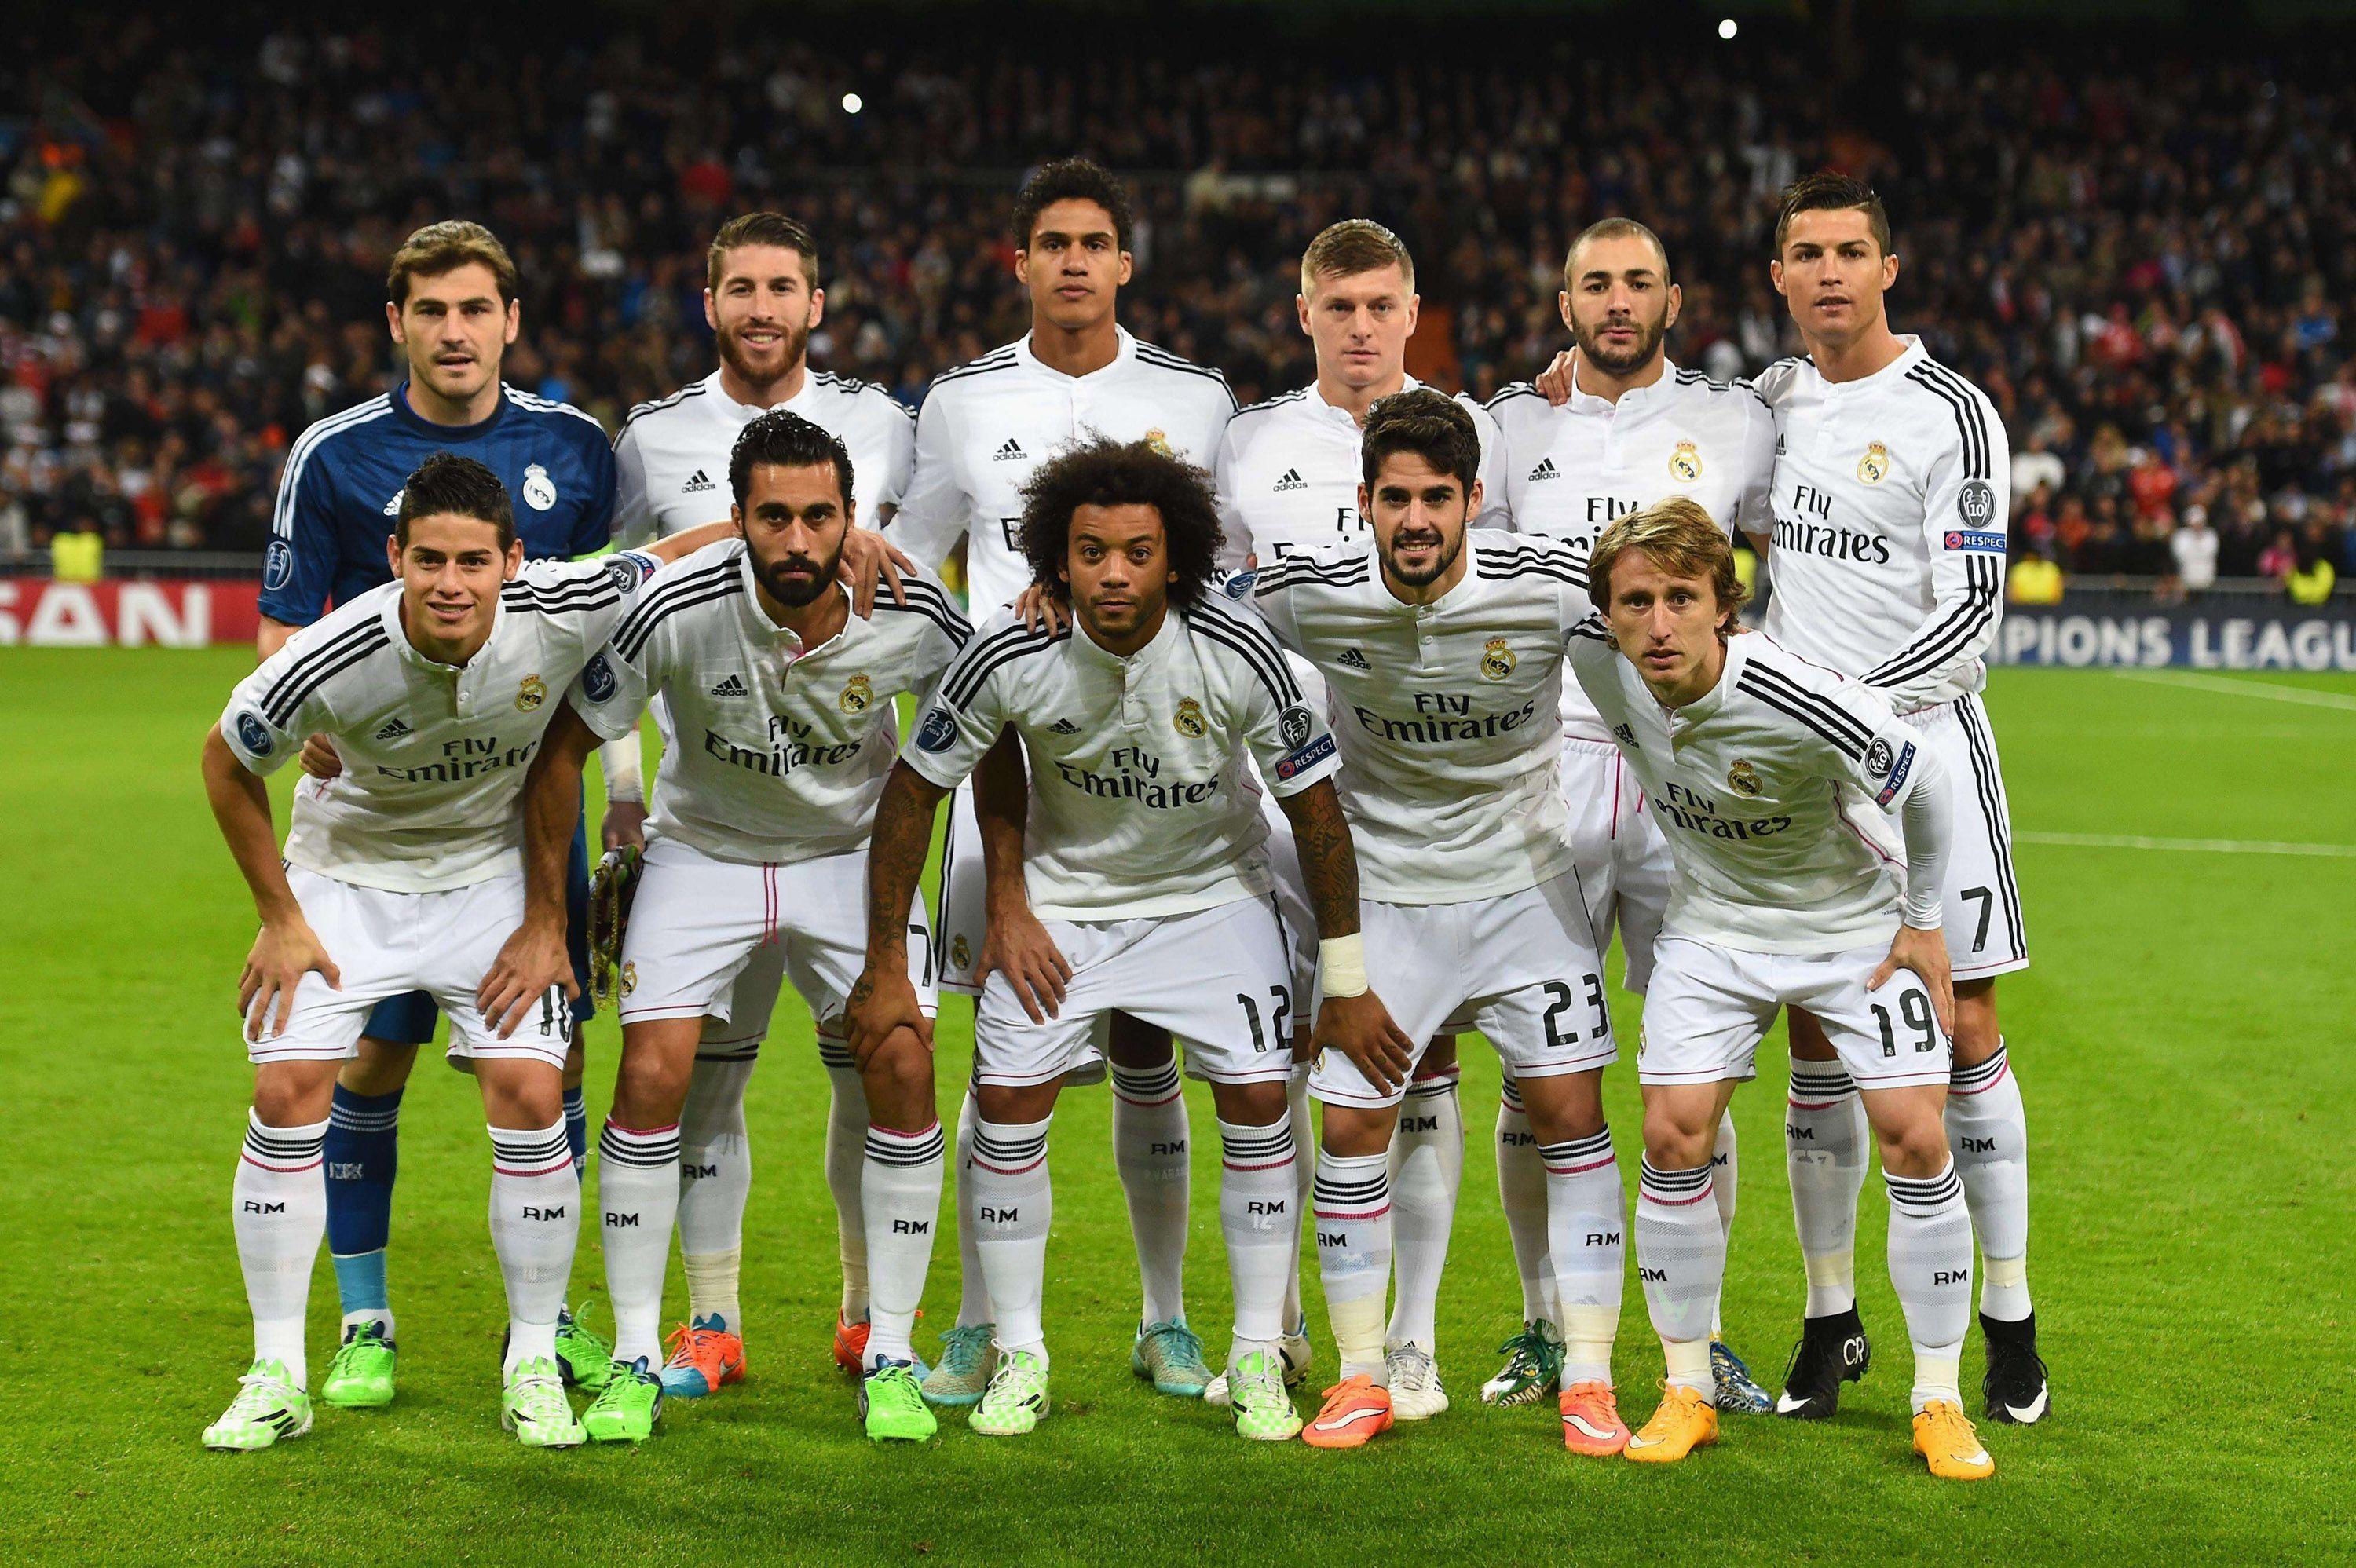 Real Madrid Wallpaper Players and Names for 2014